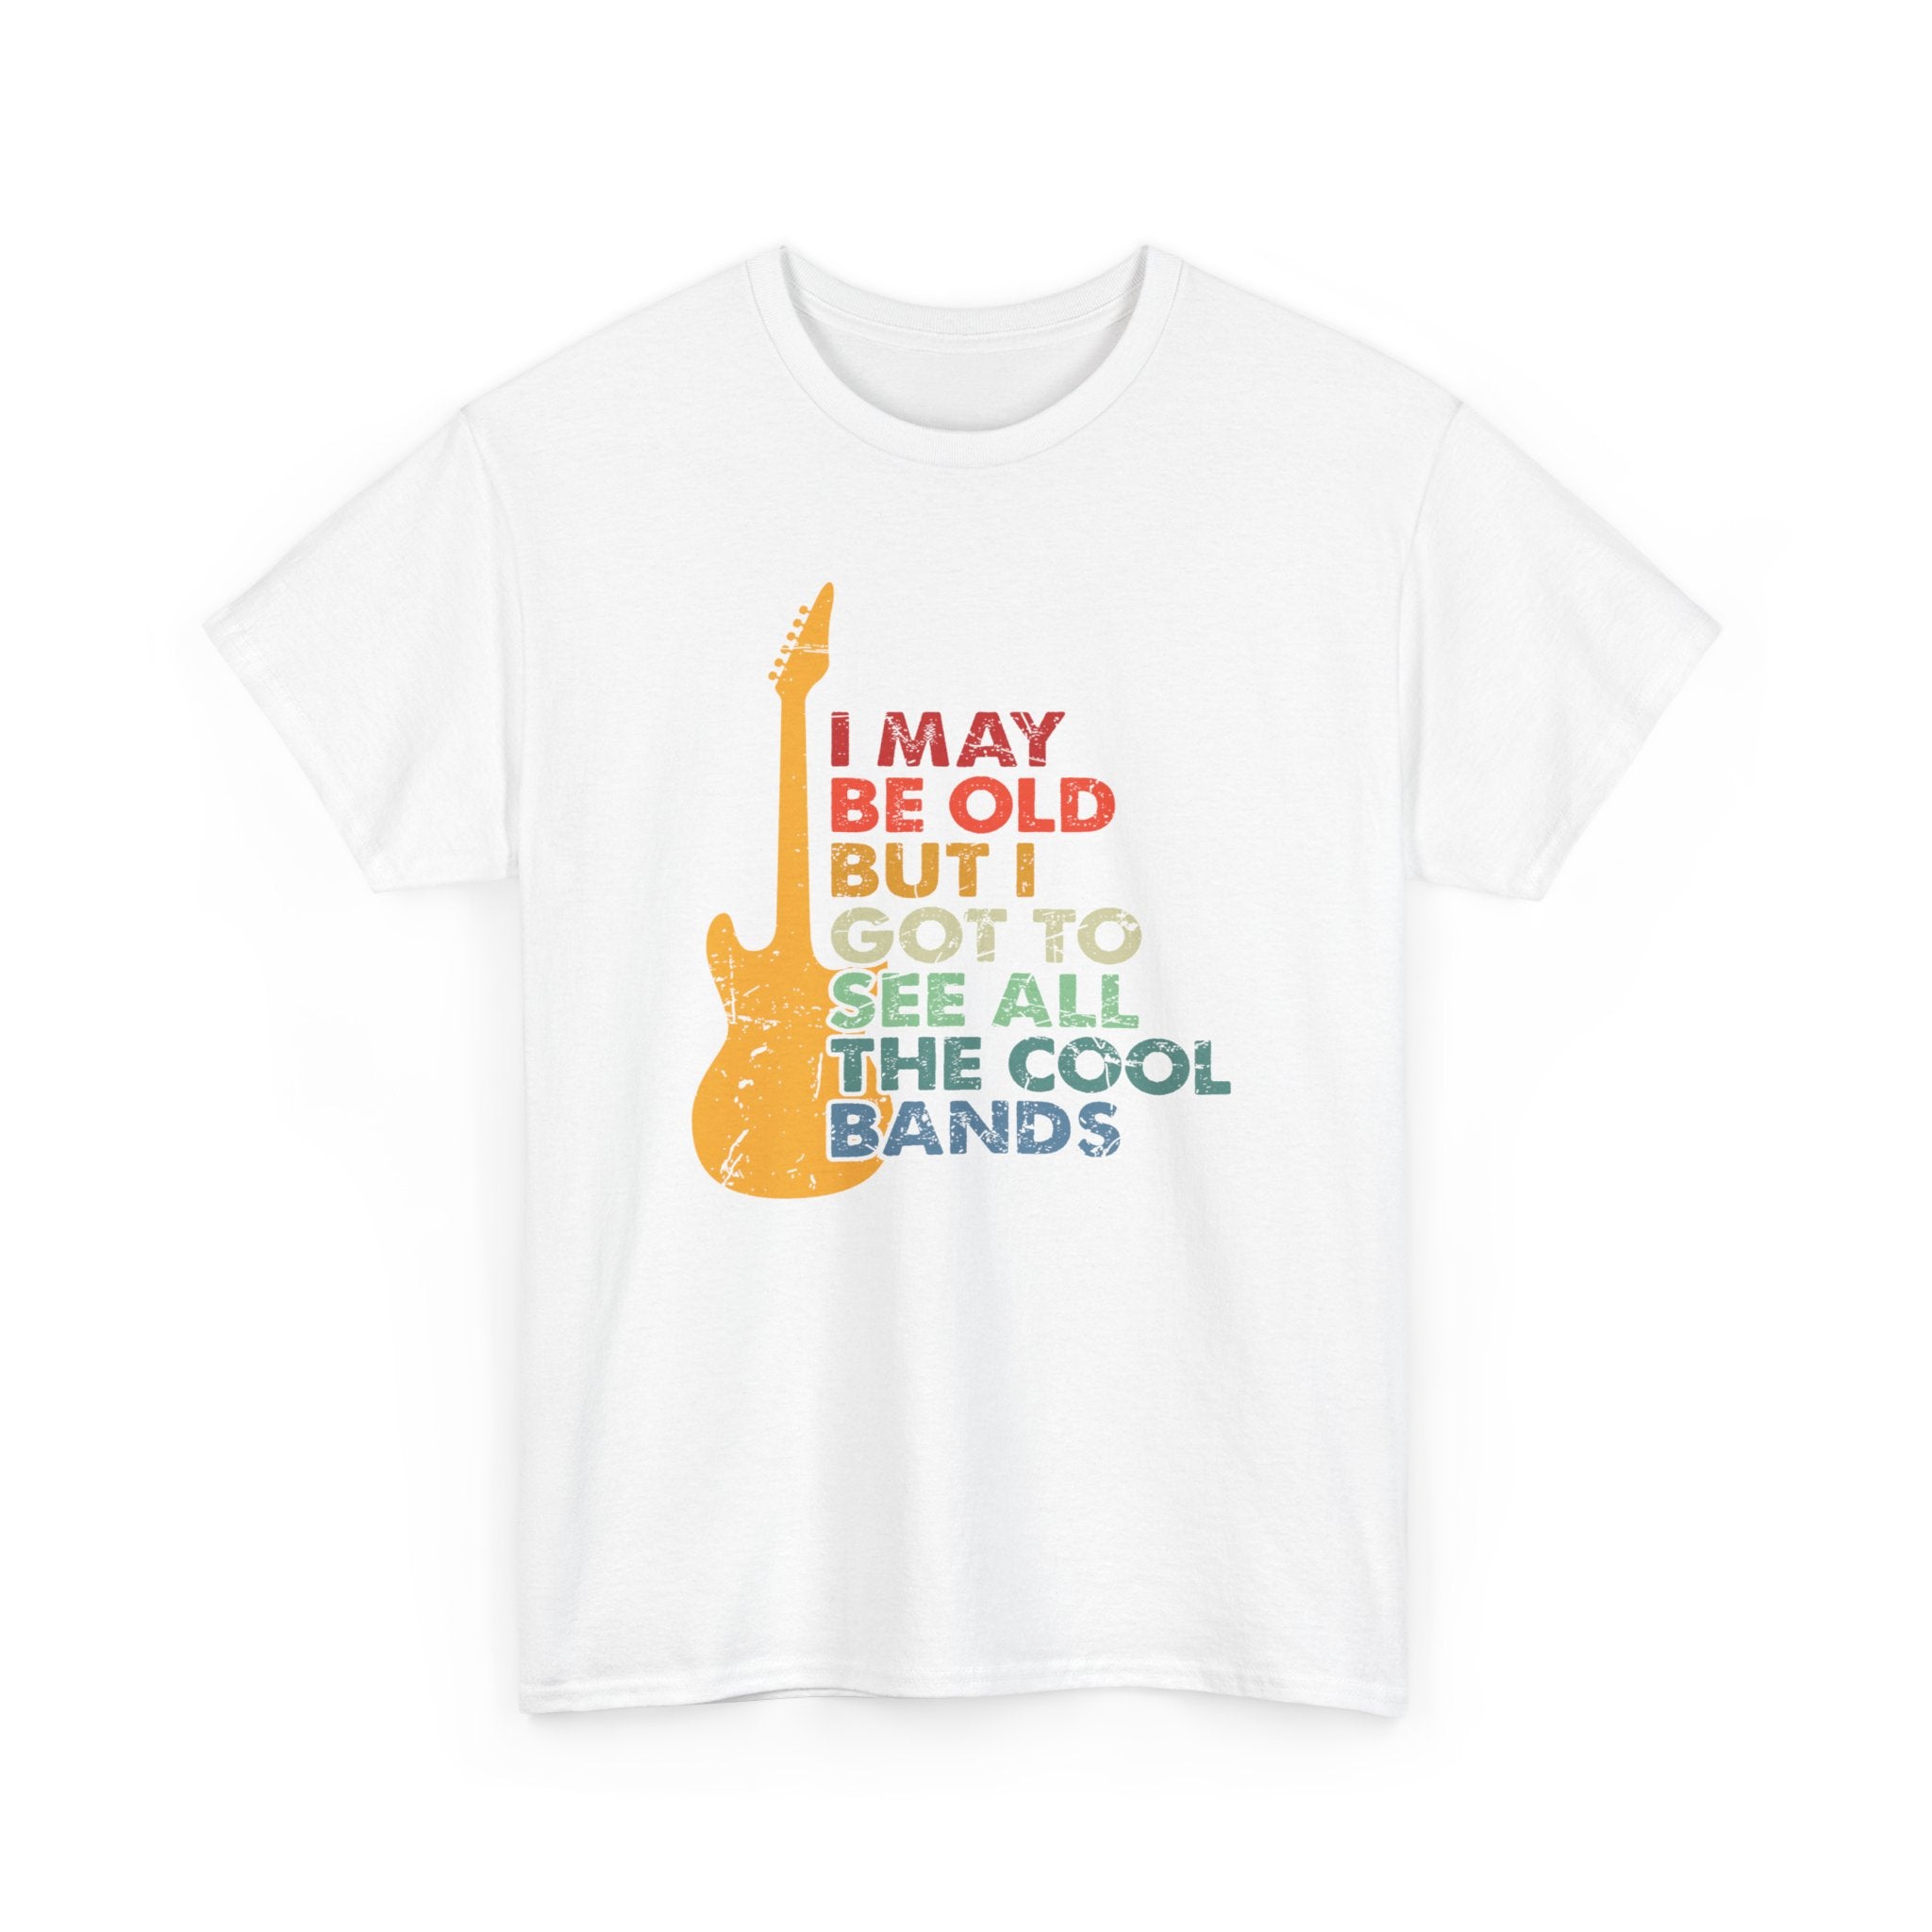 The cool bands  - Unisex Heavy Cotton Tee